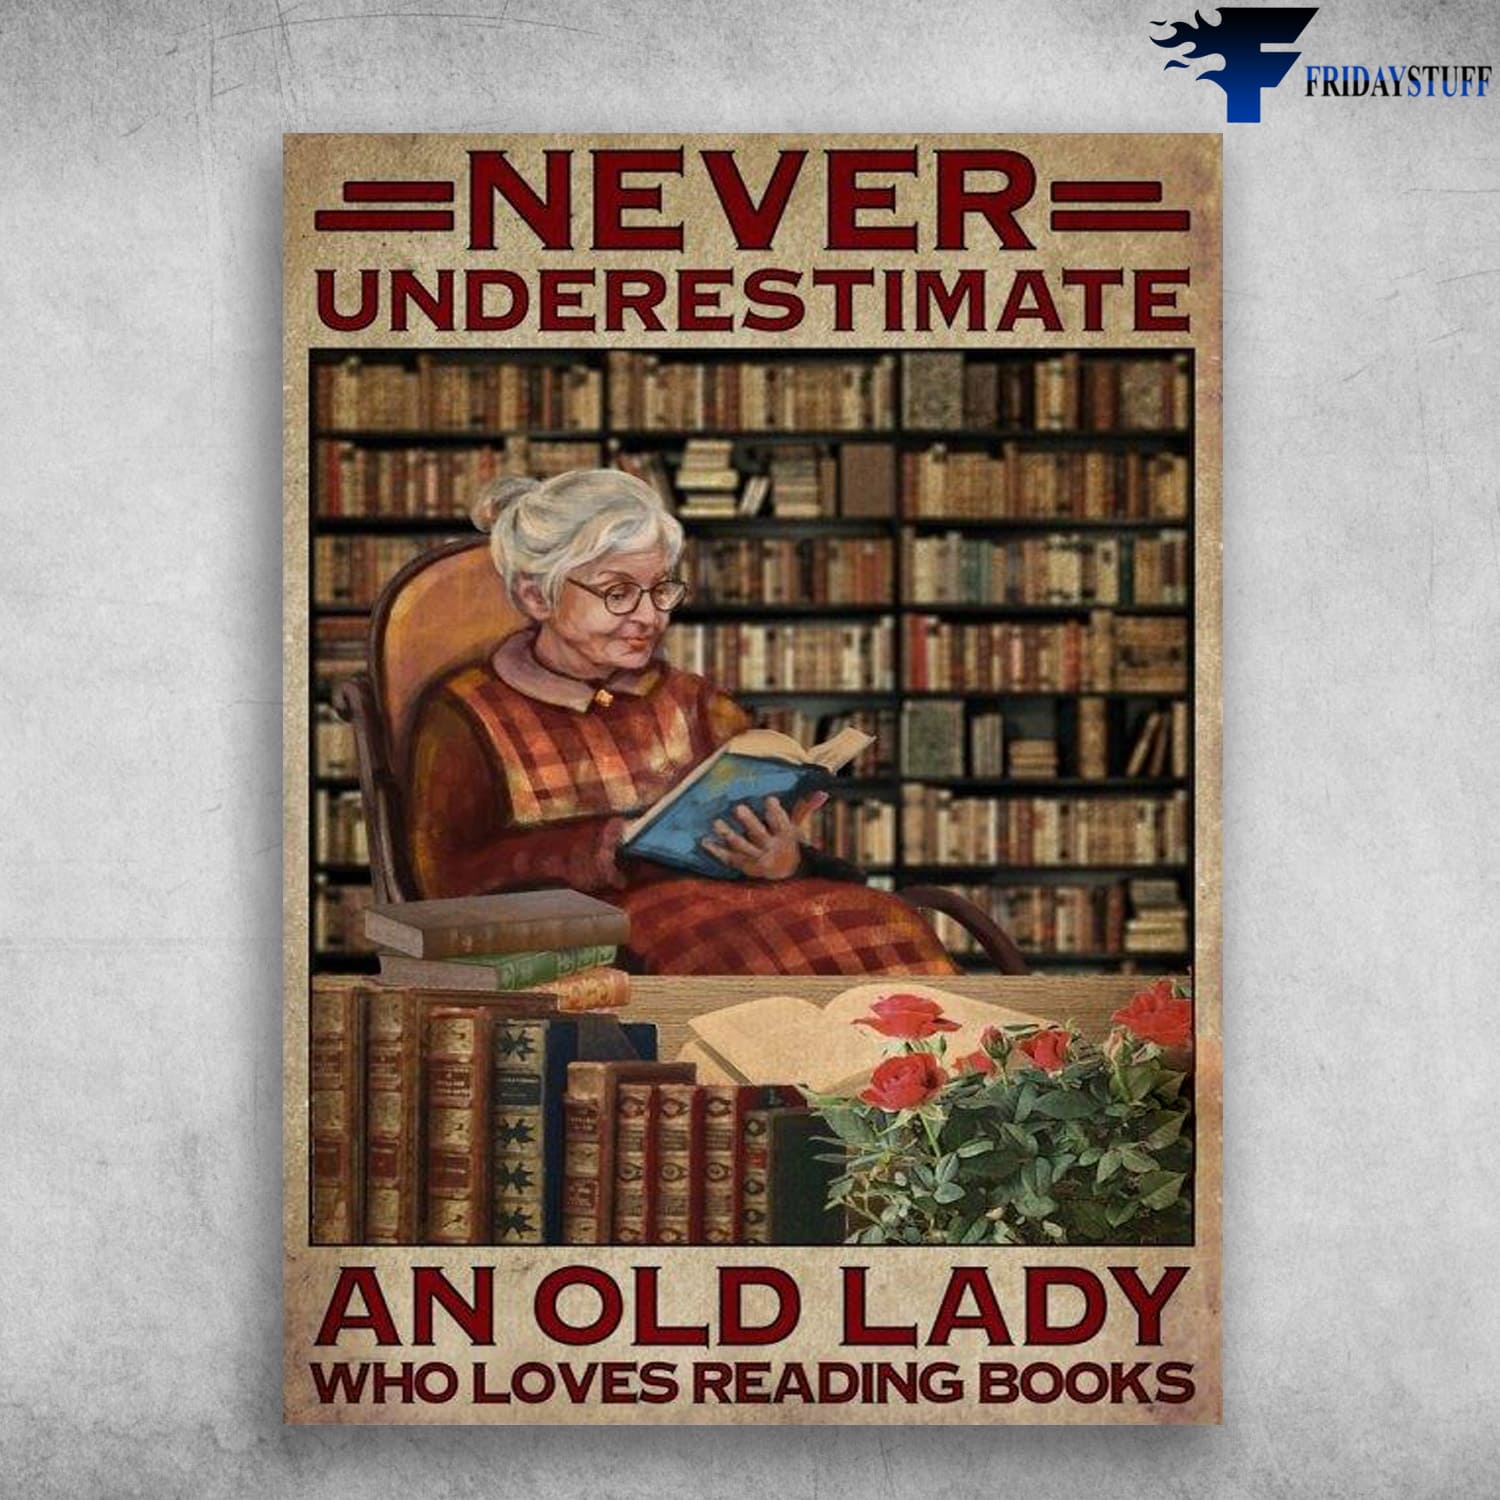 Book Lover, Old Lady Reading, Never Underestimate Old Lady, Who Loves Reading Books